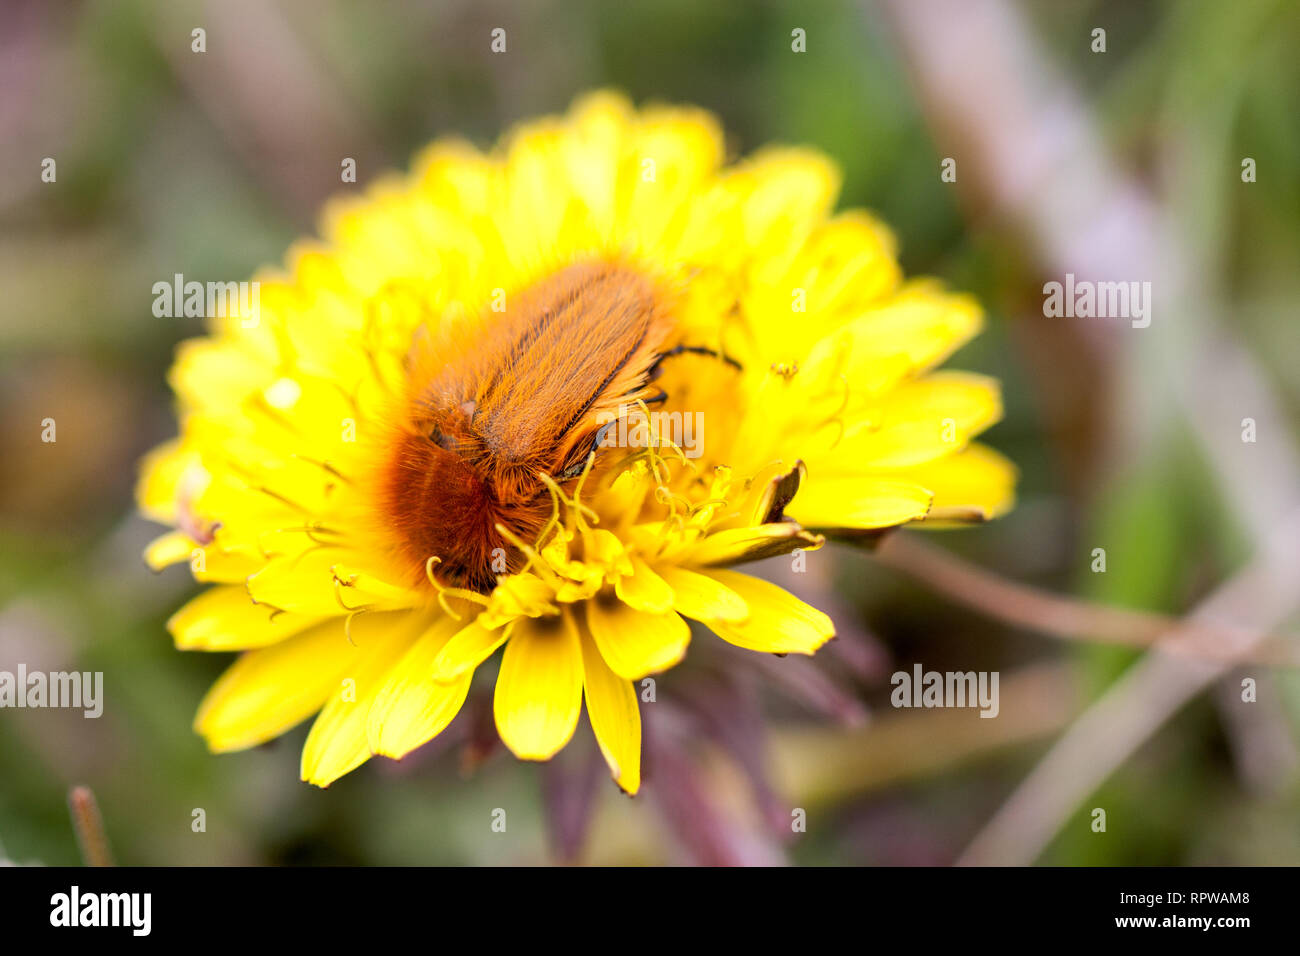 May bug or cockchafer or Melolontha on a dandelion Stock Photo